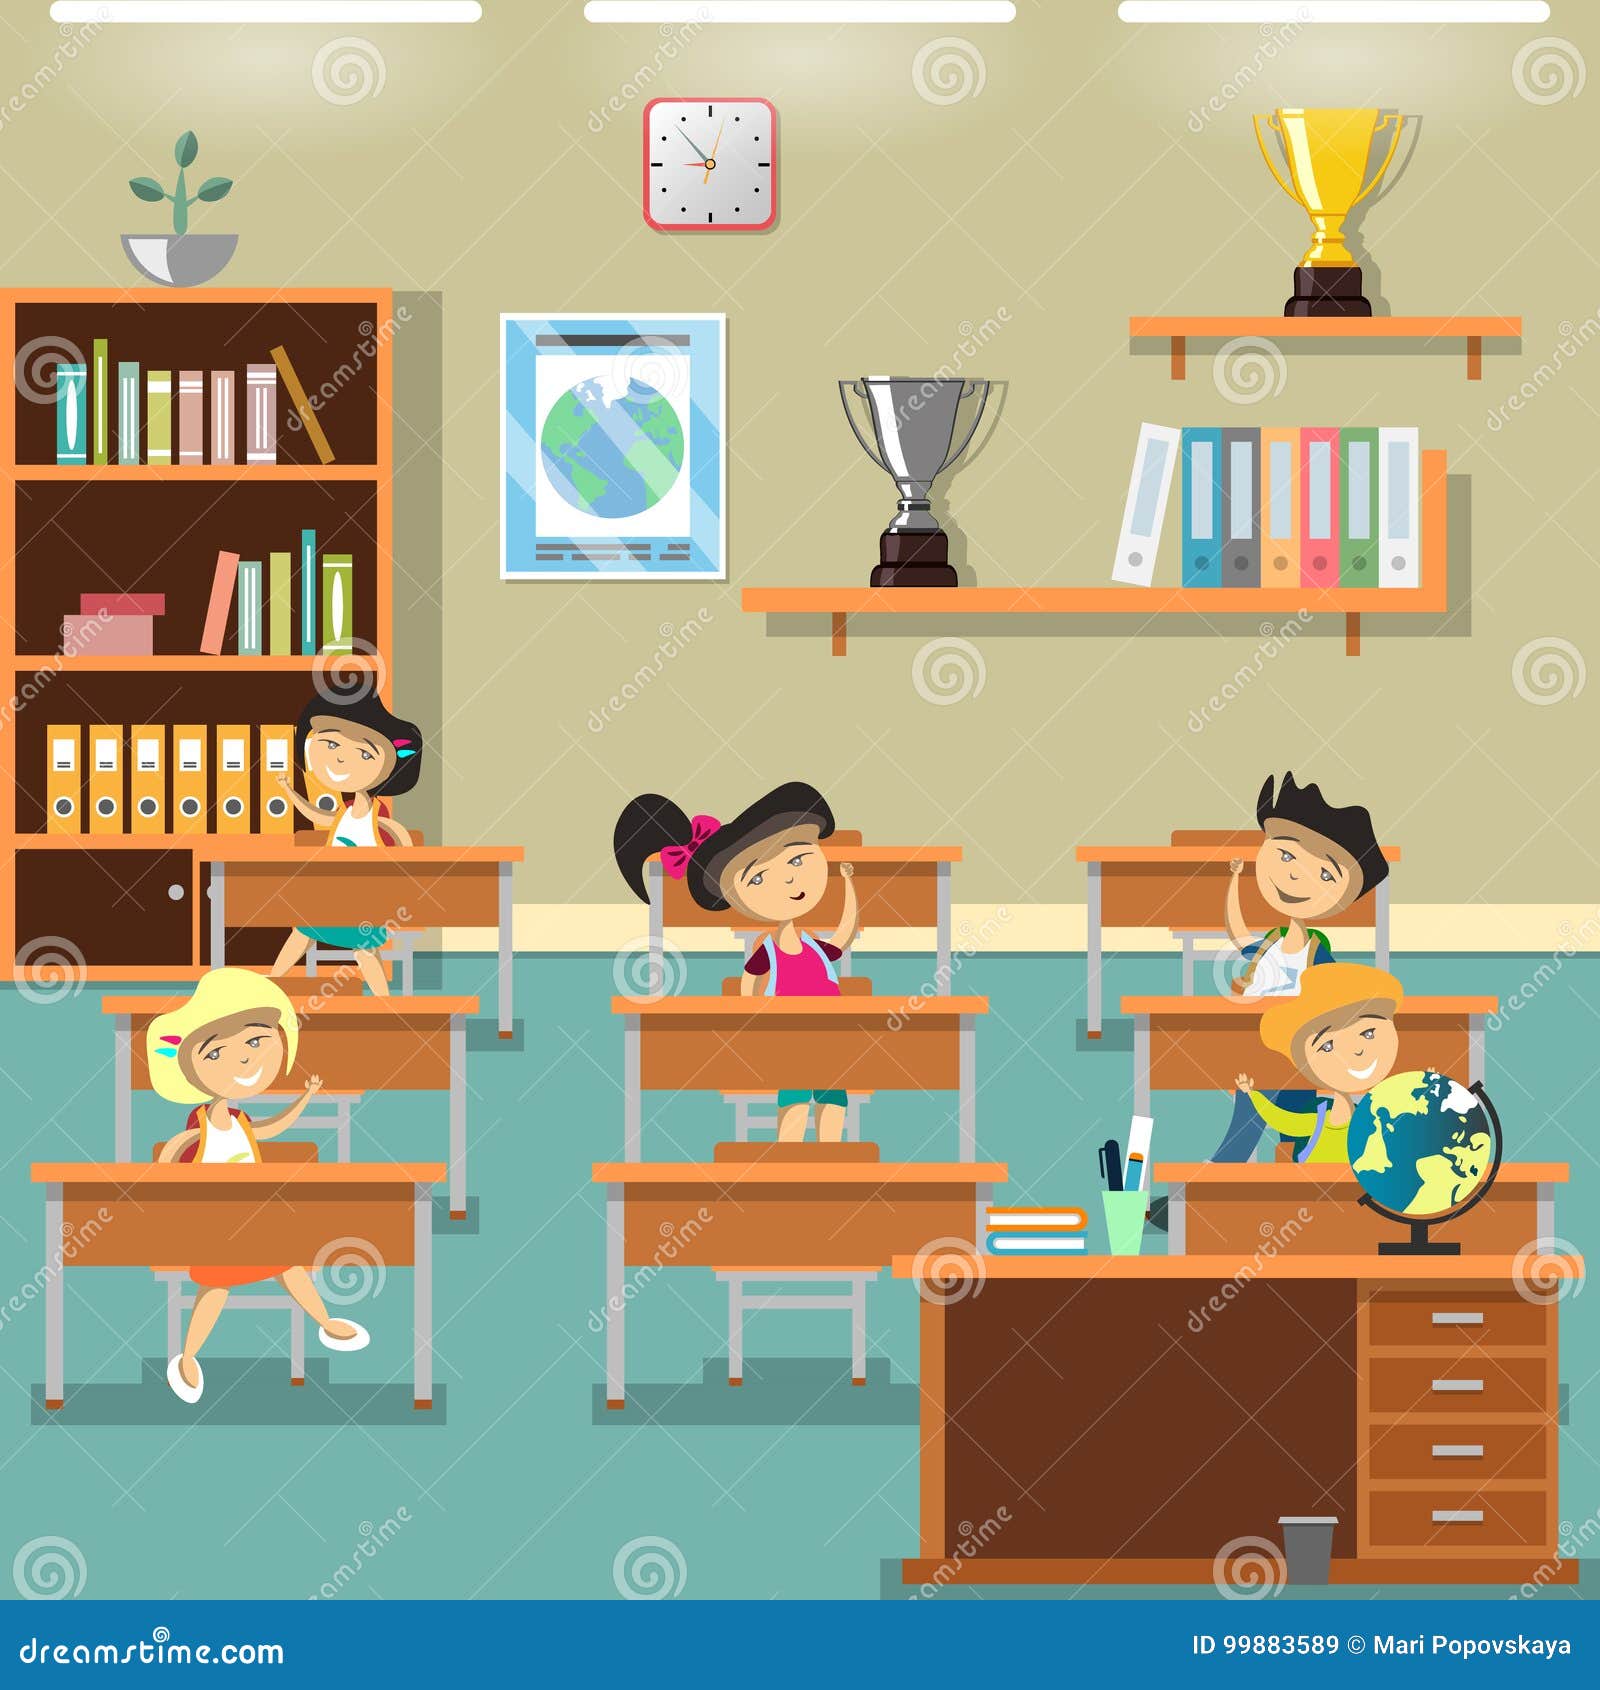 Illustration of a Kids in Classroom Stock Vector - Illustration of